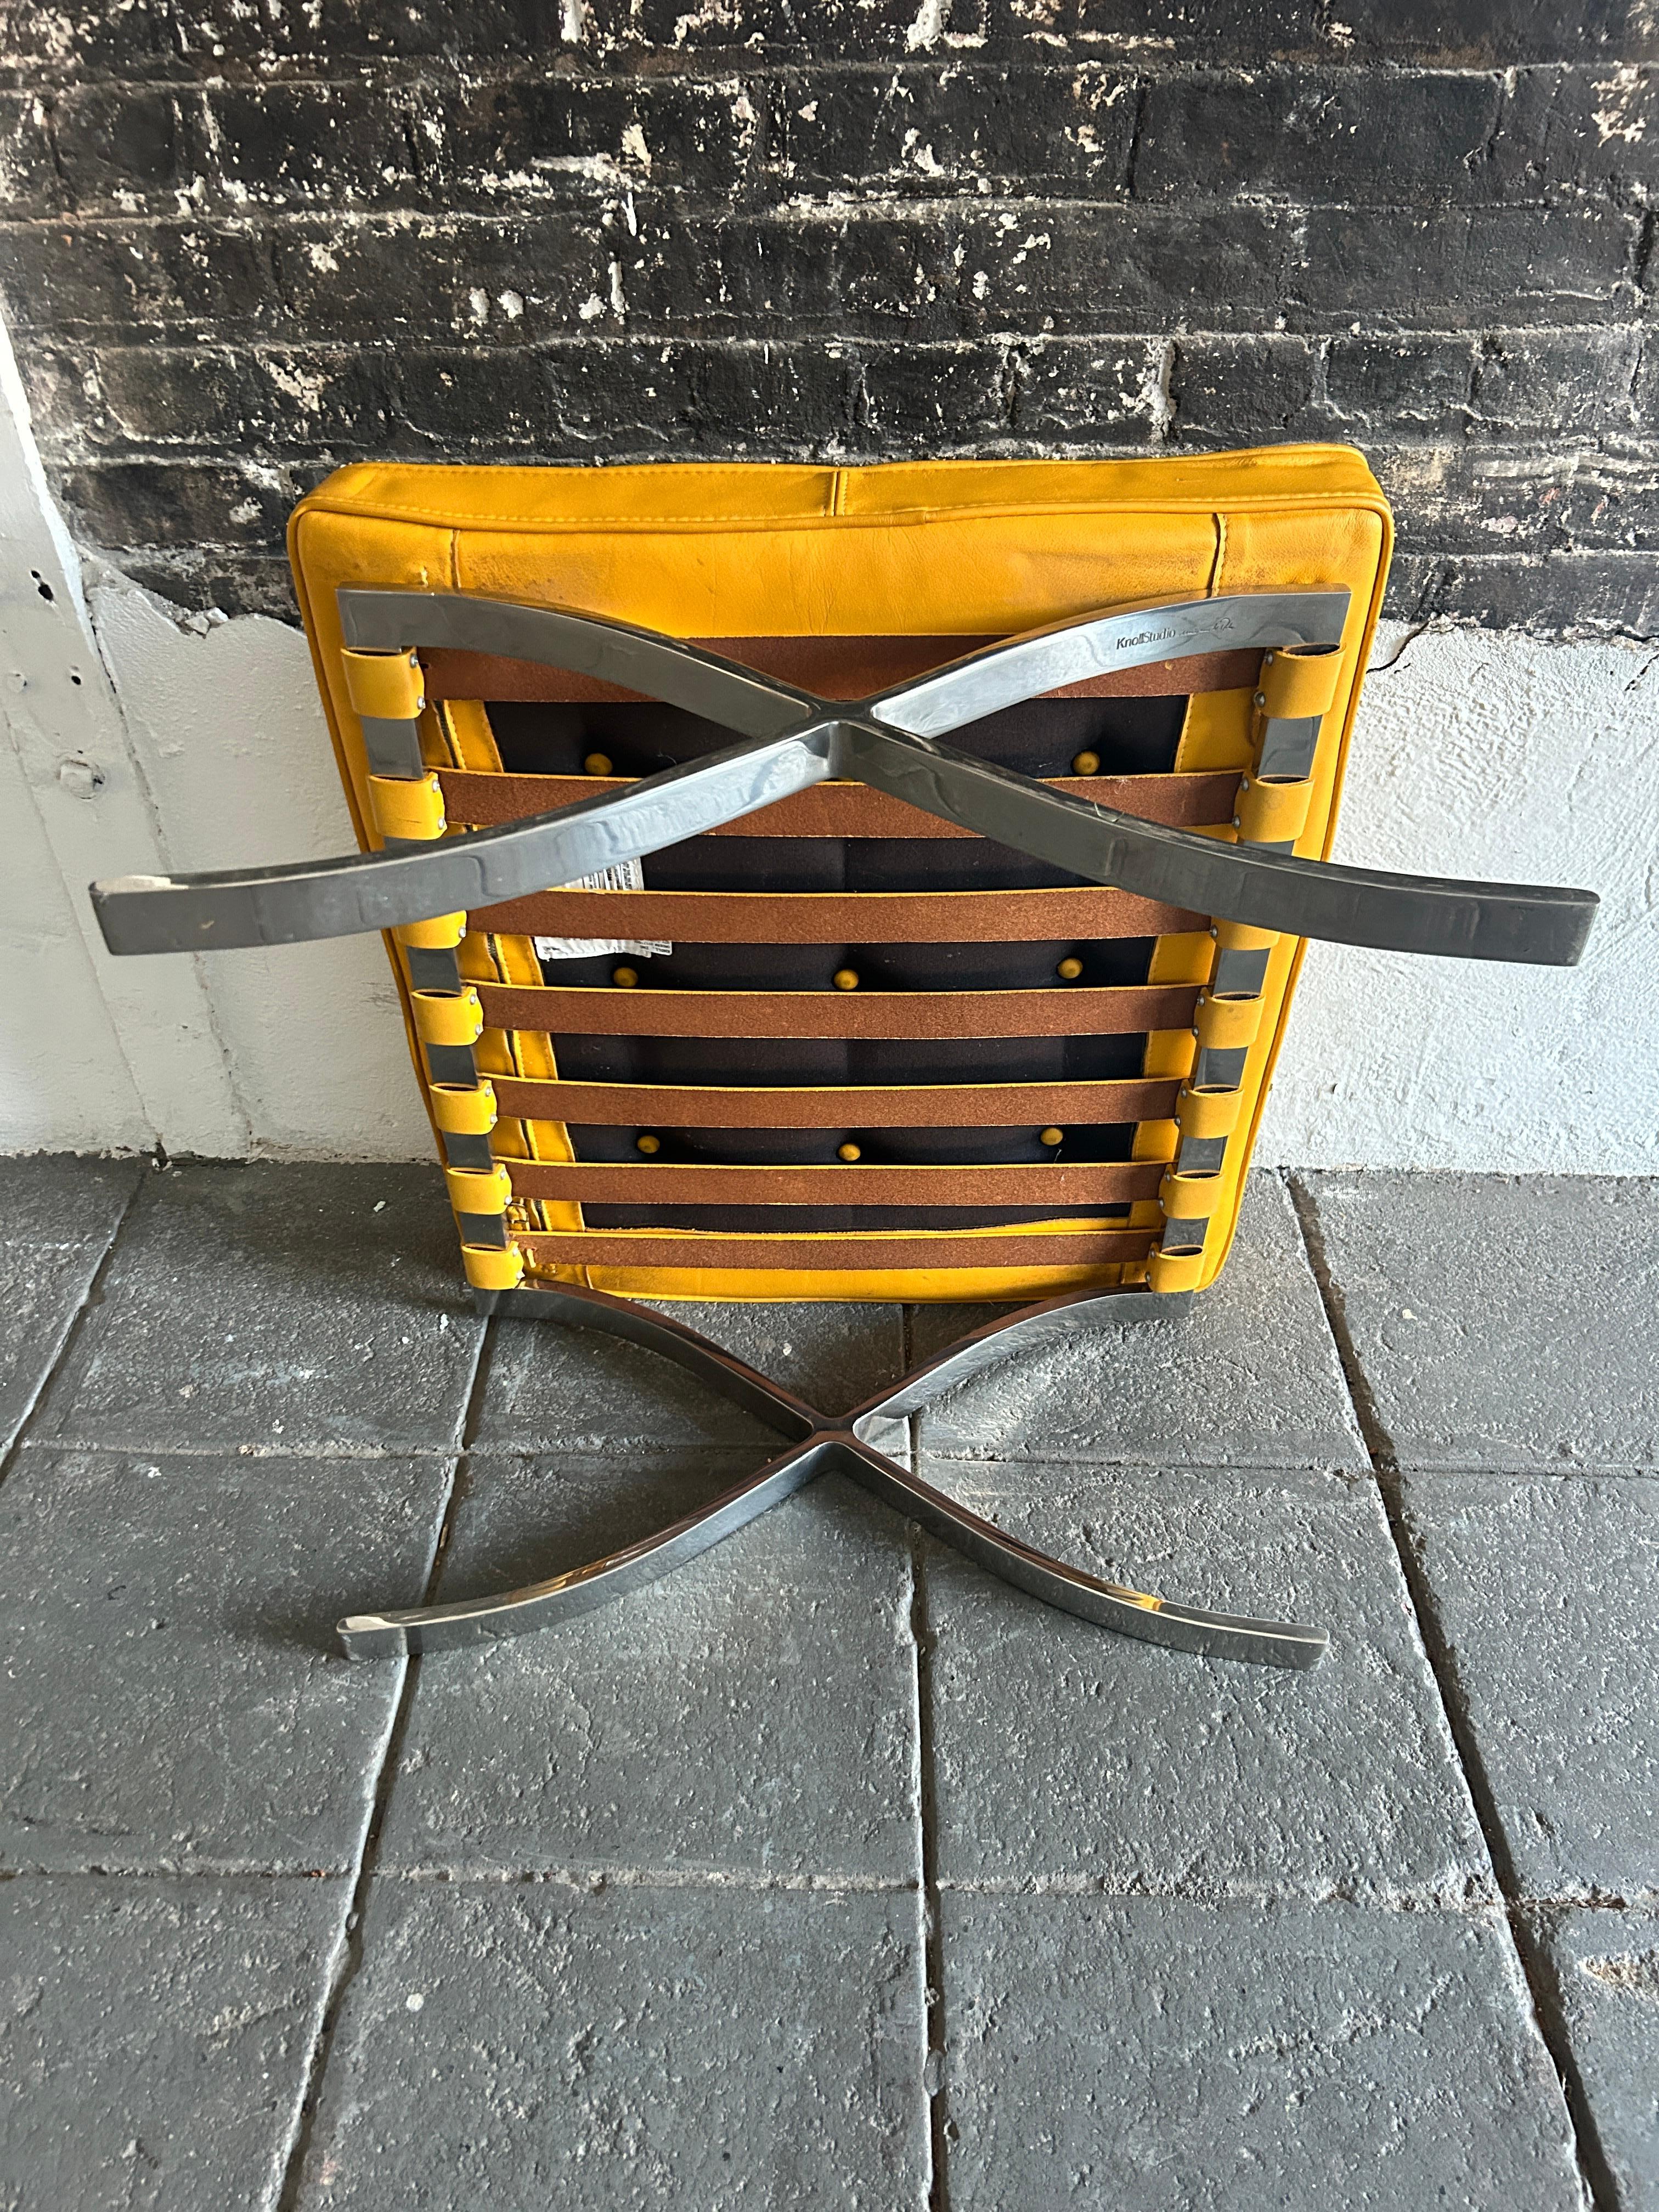 stool is bright yellow